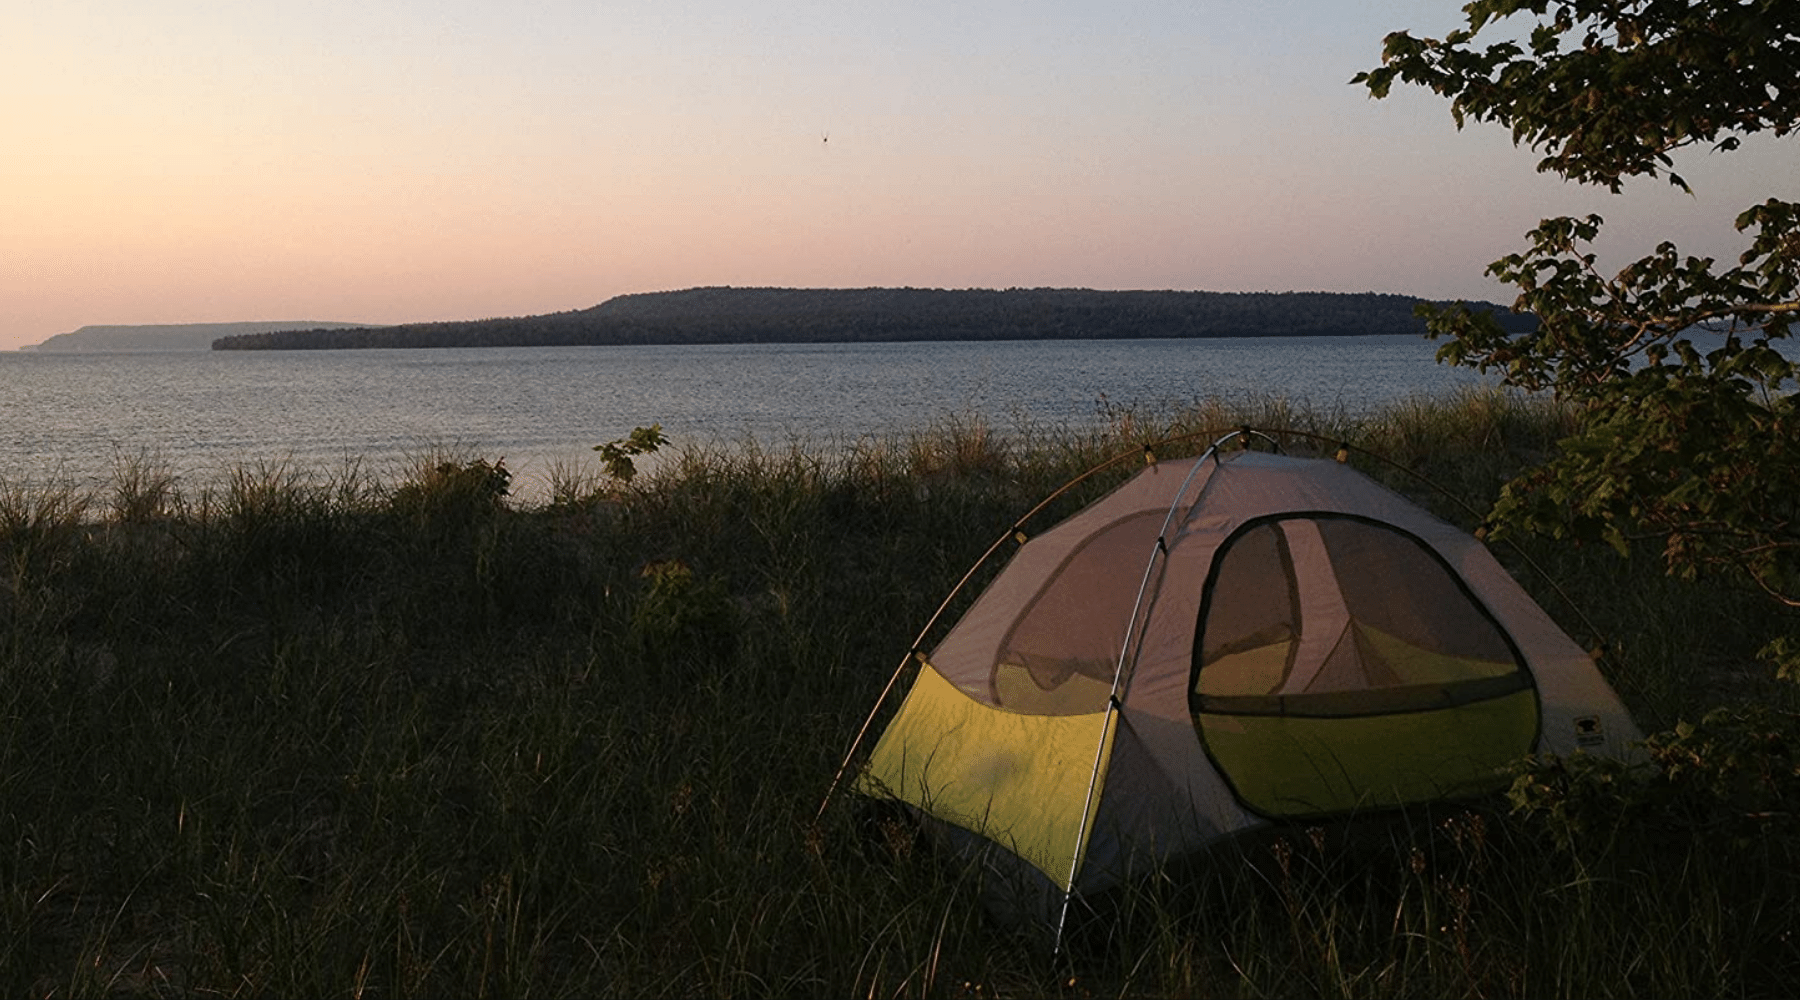 Mountainsmith 2 person tent set up at sunset 